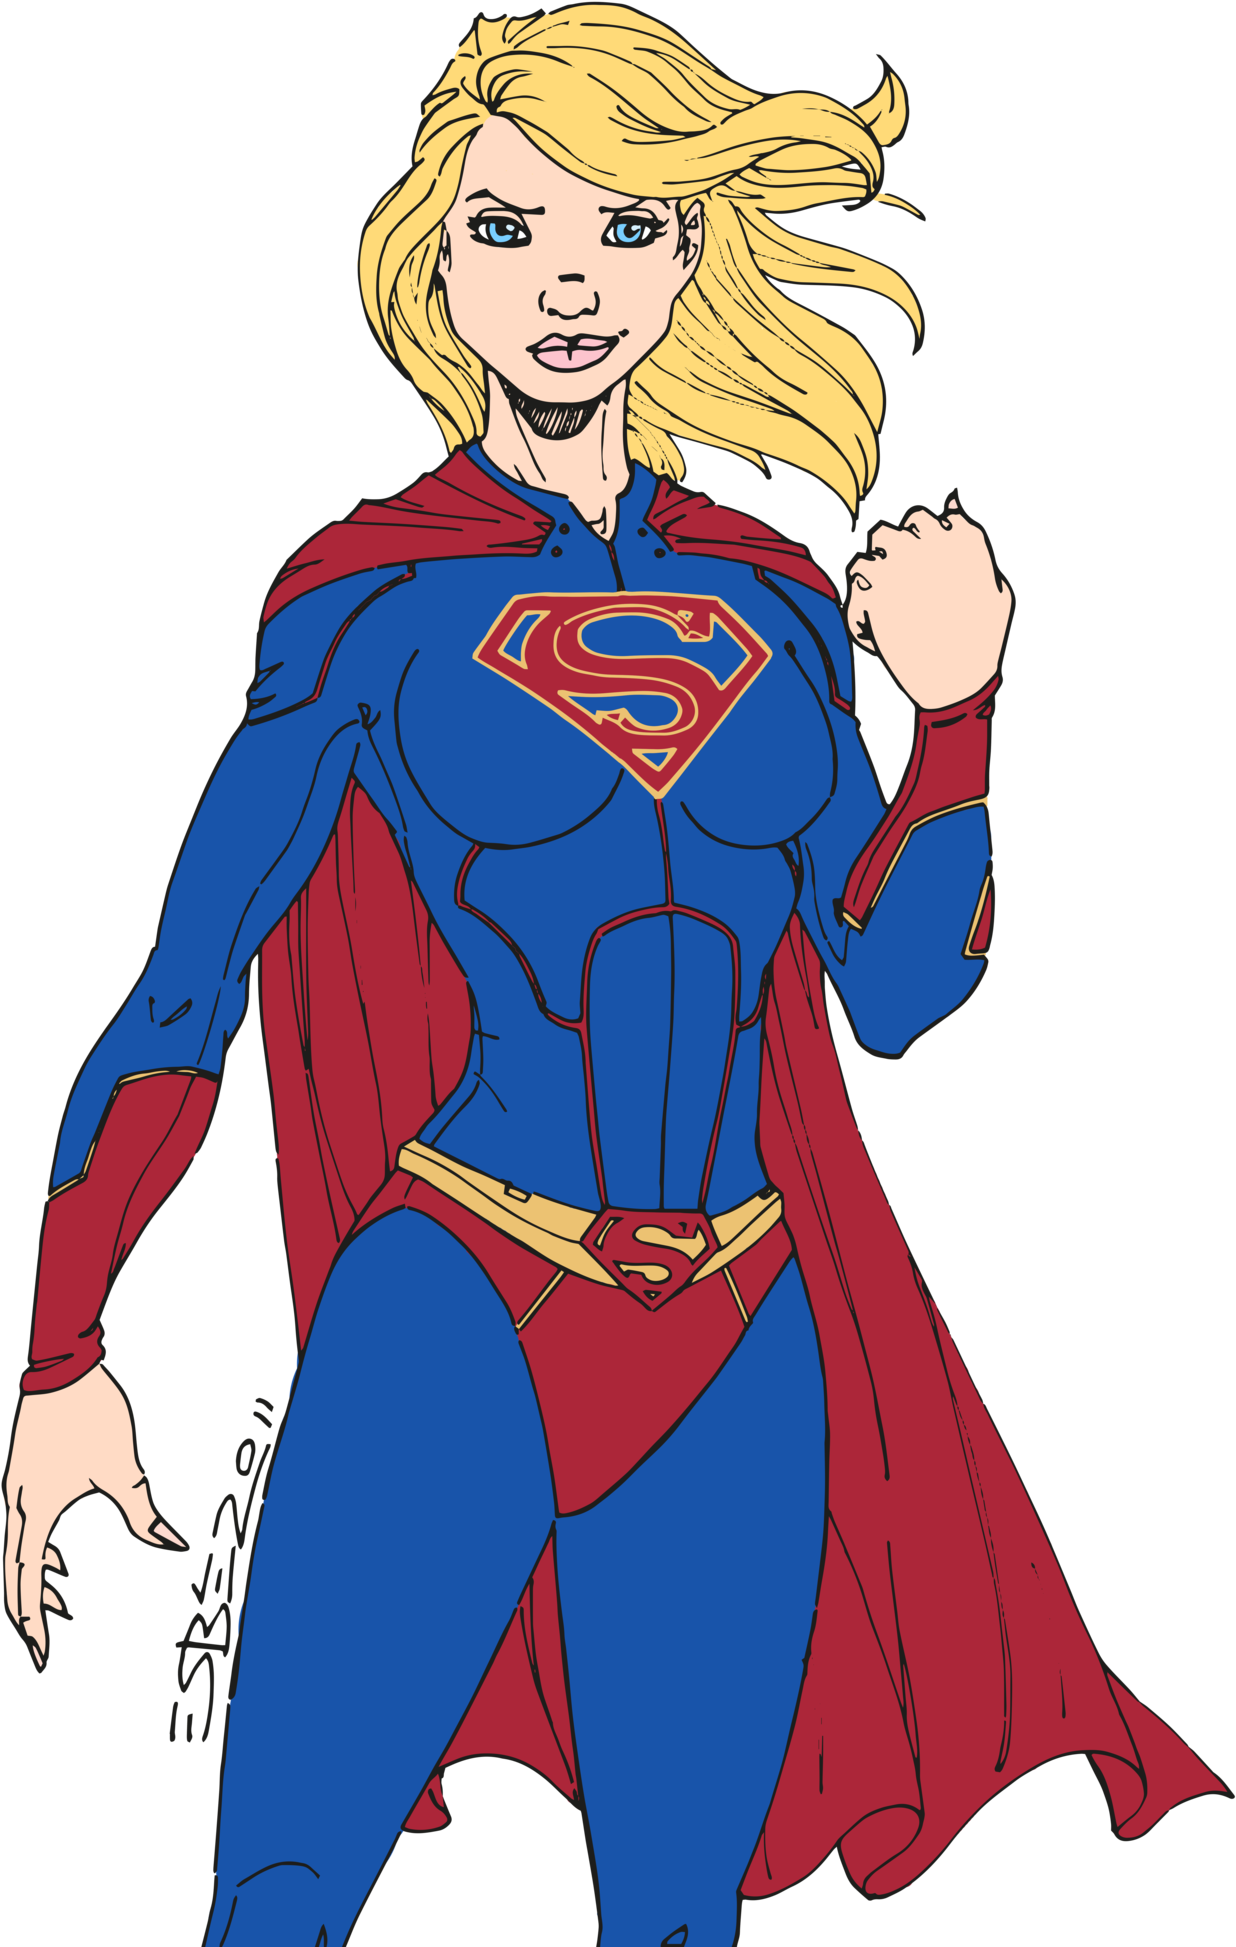 Supergirl Colored By Edcom02 Supergirl Colored By Edcom02 - Superman And Superwoman Cartoon (1600x2123)